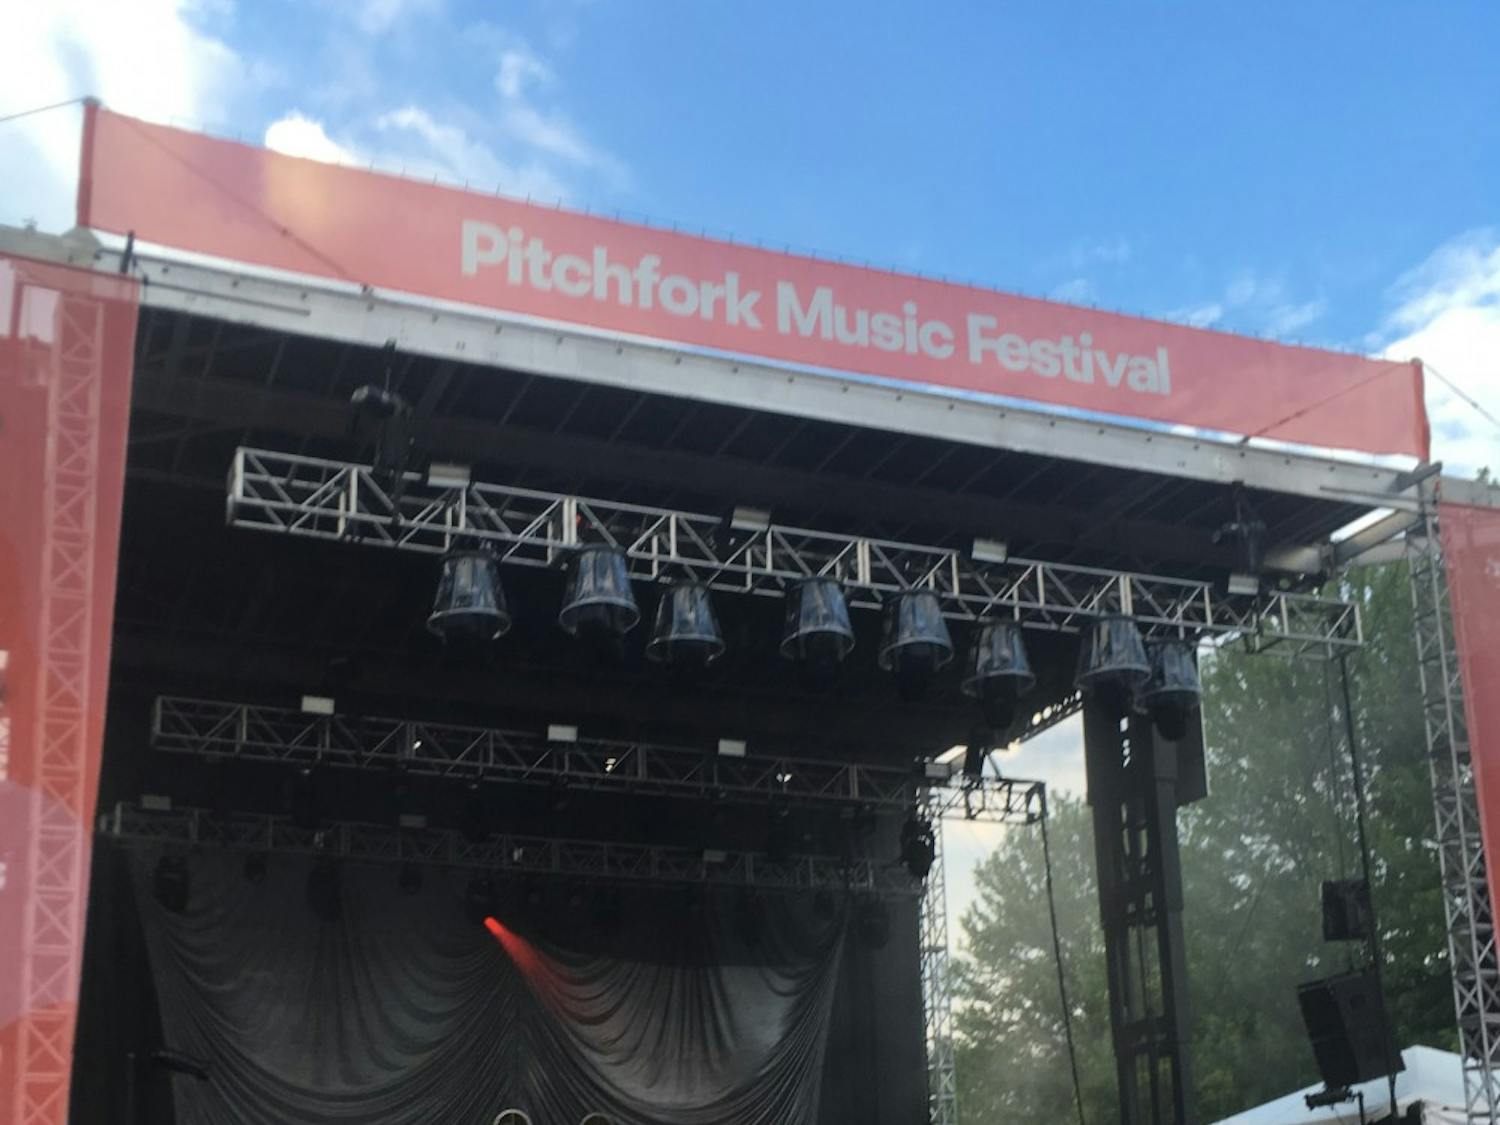 Pitchfork is a bubble: an oasis in the center of a city filled with too much to see, where up-and-coming artists join legends in the same place.